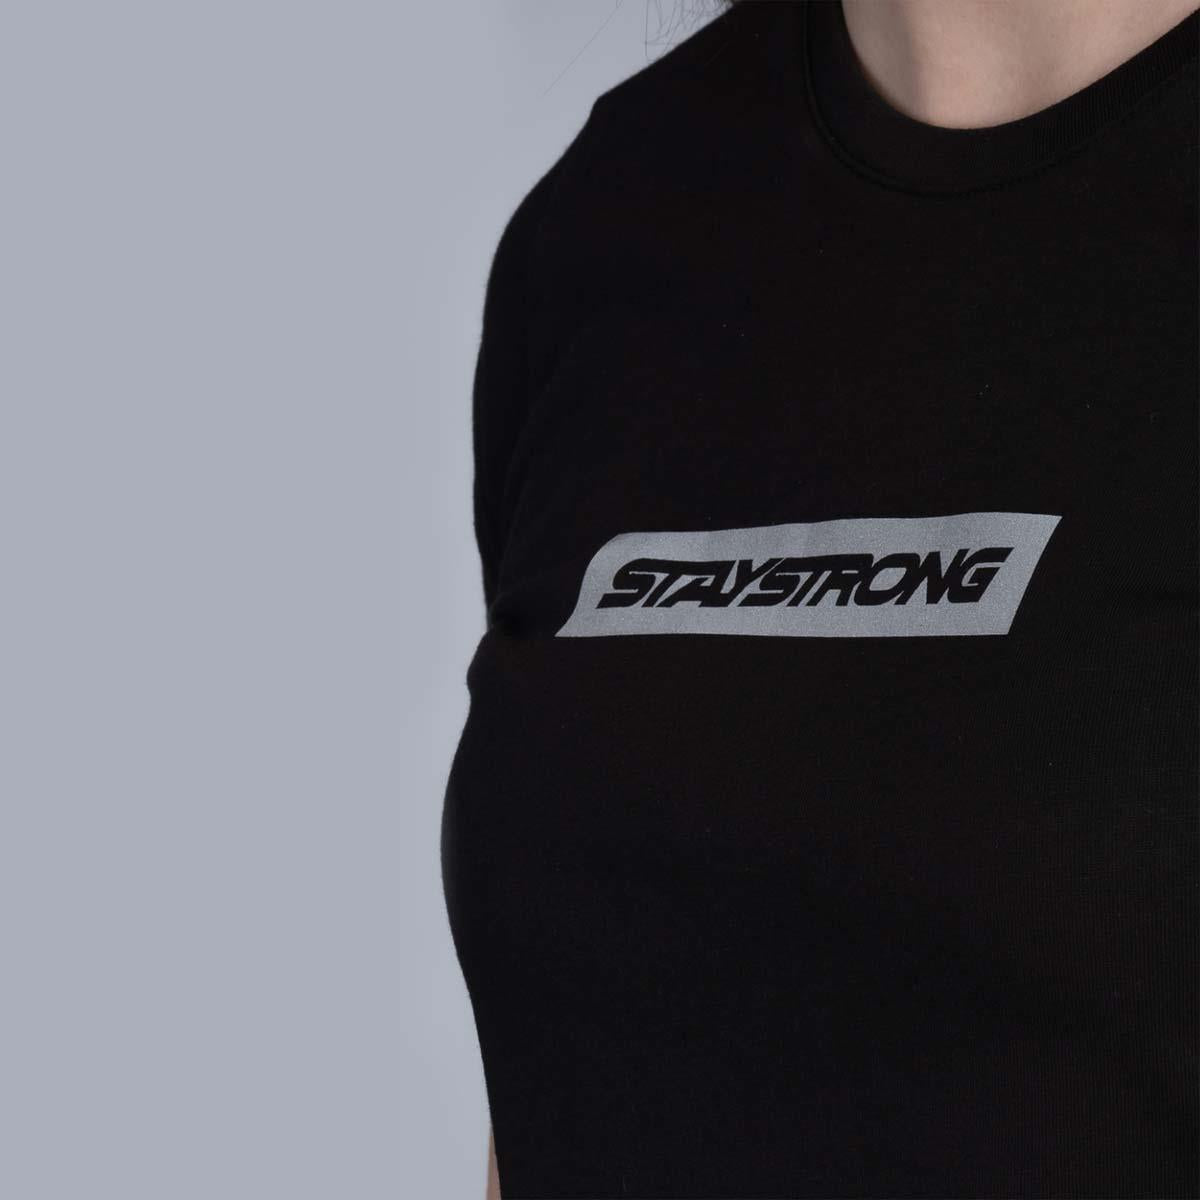 Stay Strong Word Box Reflective Ladies T-Shirt - Black